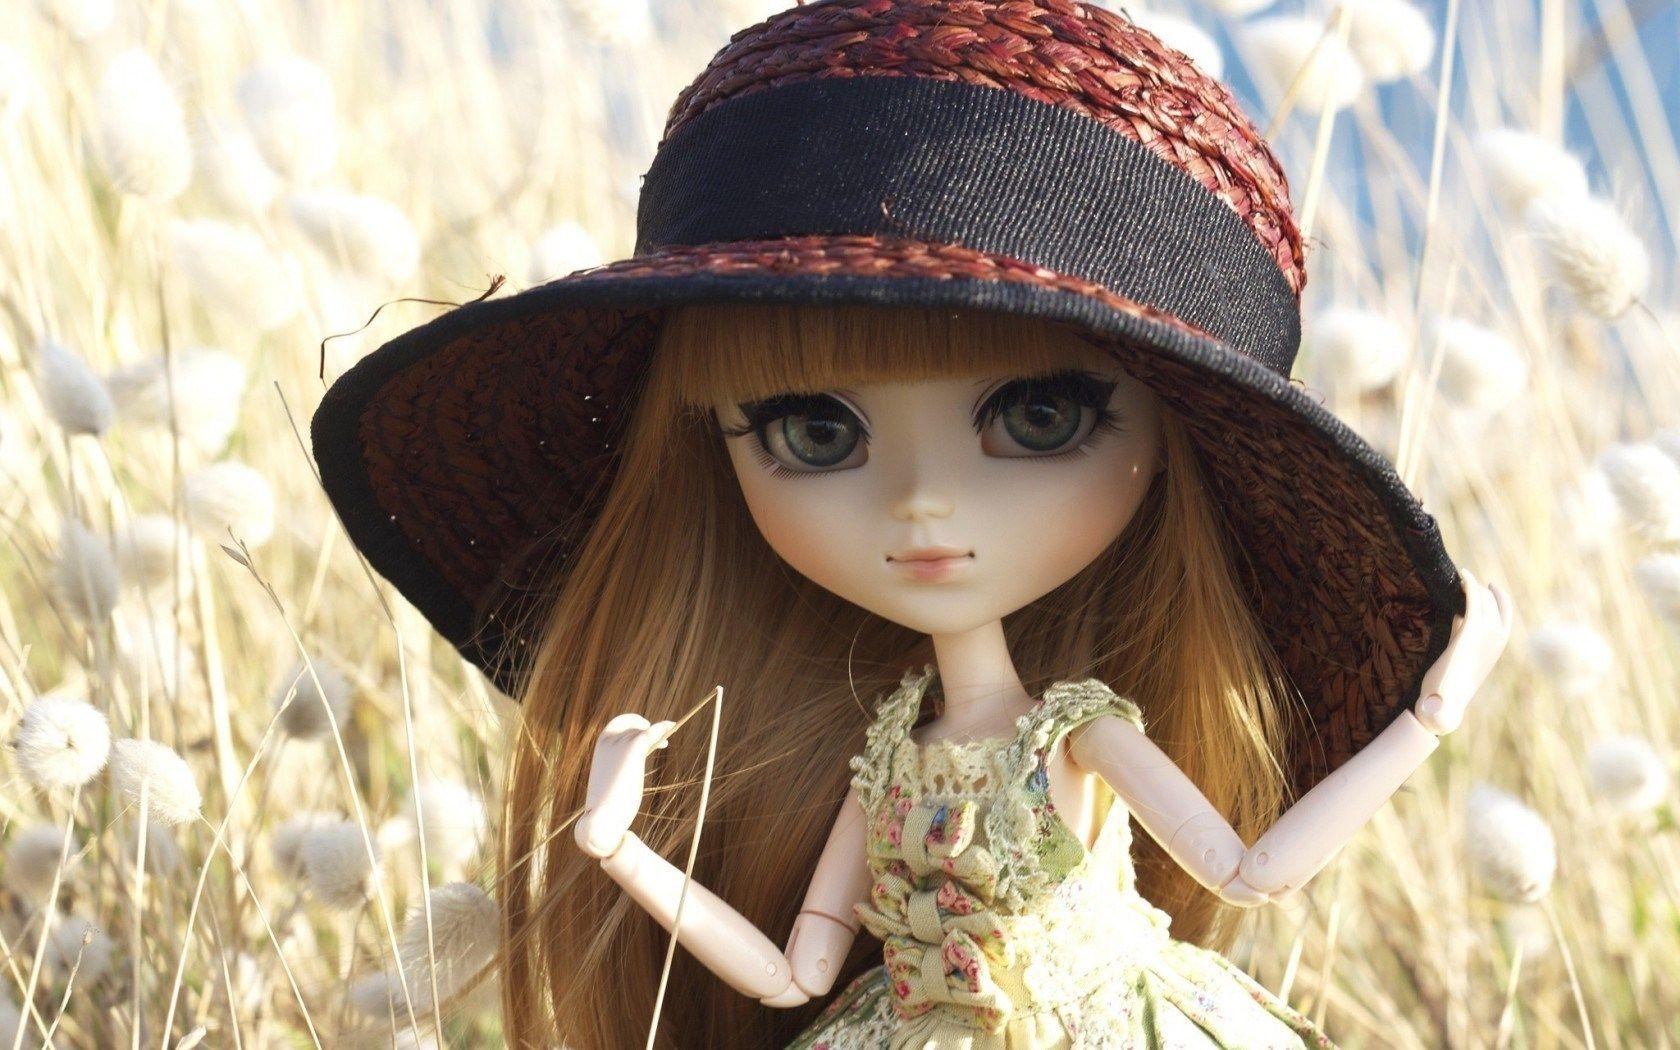 Lovely Doll HD Image. Beautiful image HD Picture & Desktop